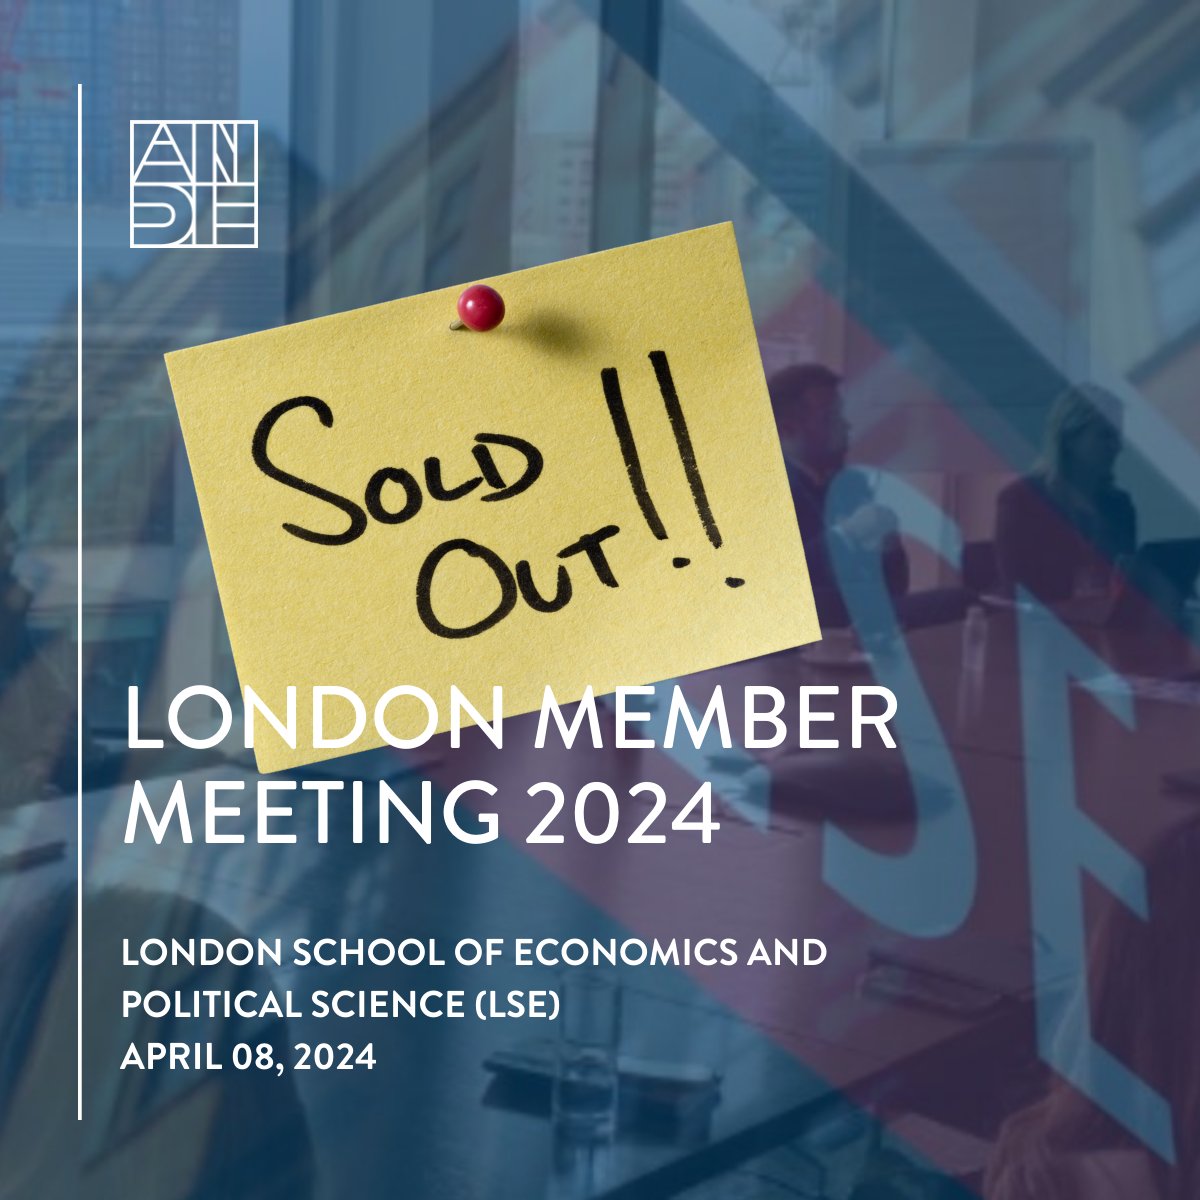 London Member Meeting SOLD OUT! Check-in starts 9:30am at the LSE campus (meeting 10am-5pm). Final agenda: andeglobal.org/event/london-m… We're thrilled to see you there!